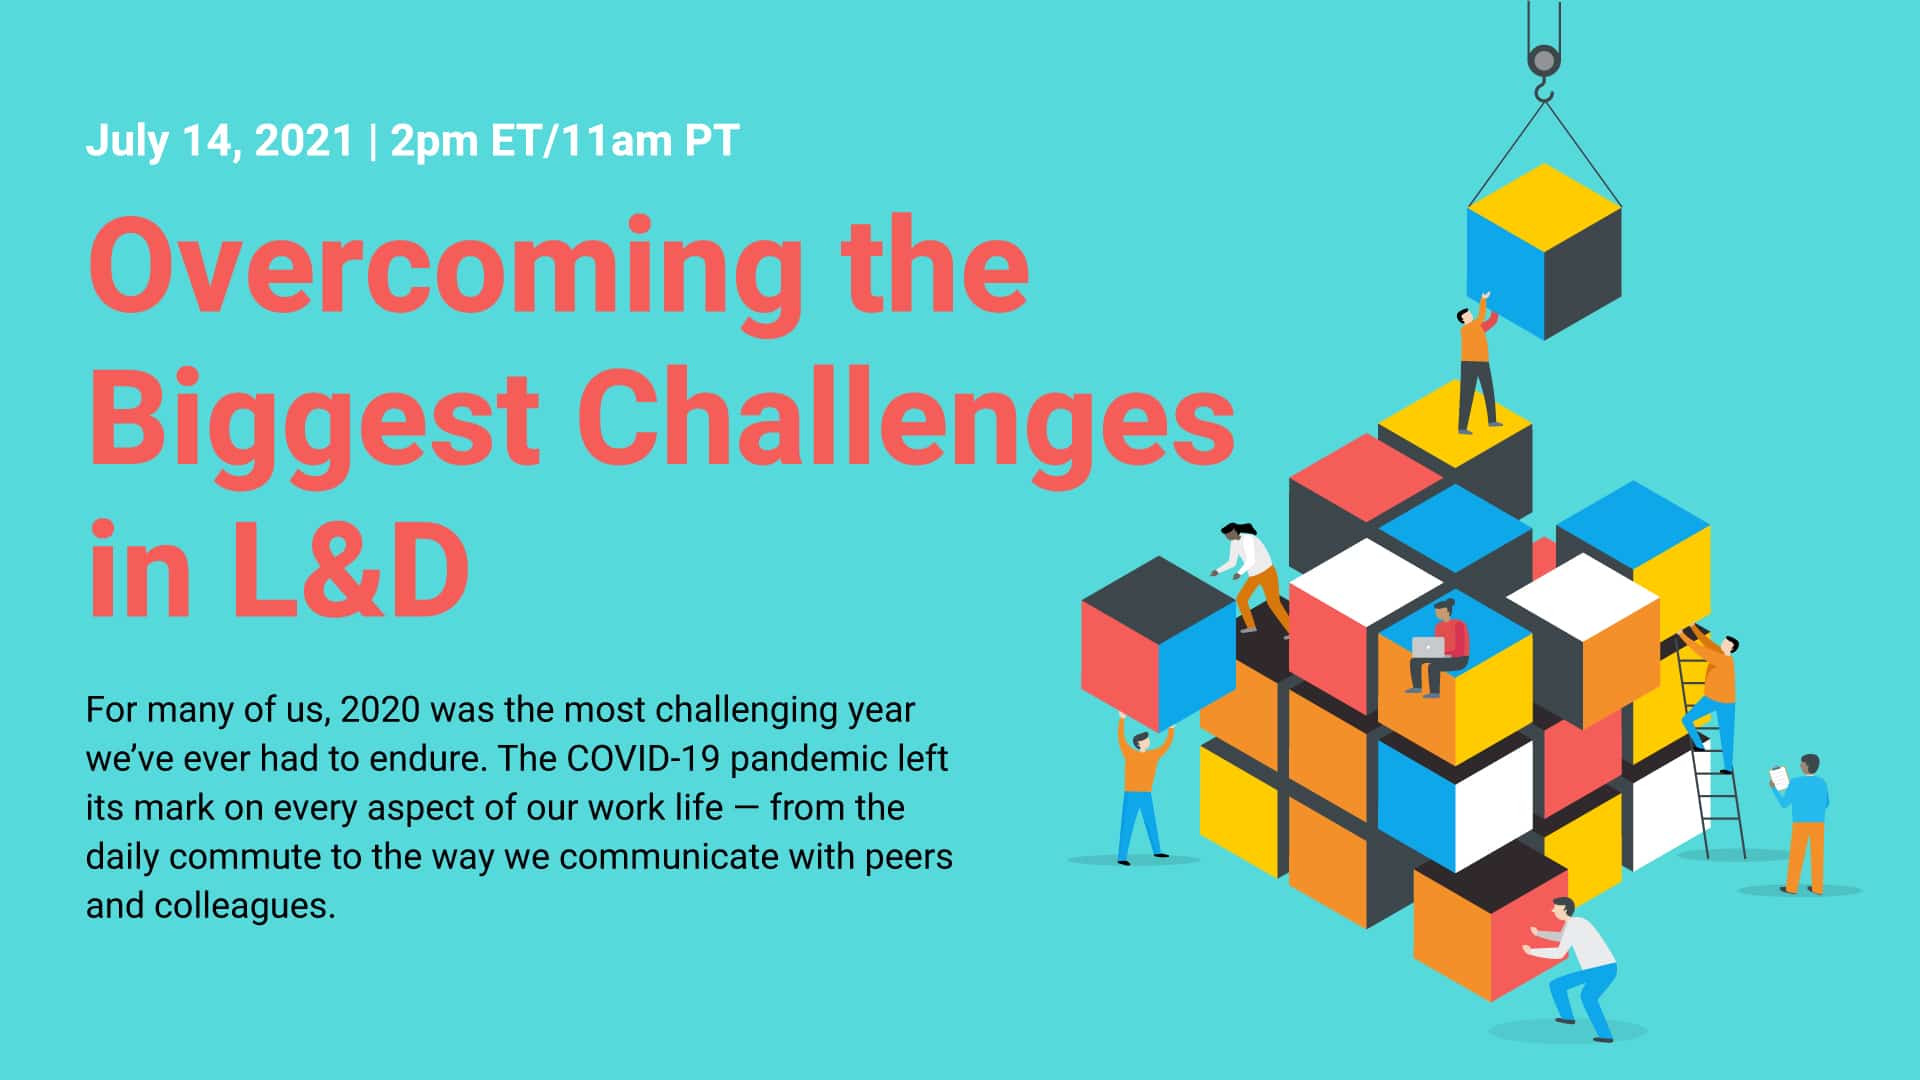 Overcoming the Biggest Challenges in L&D